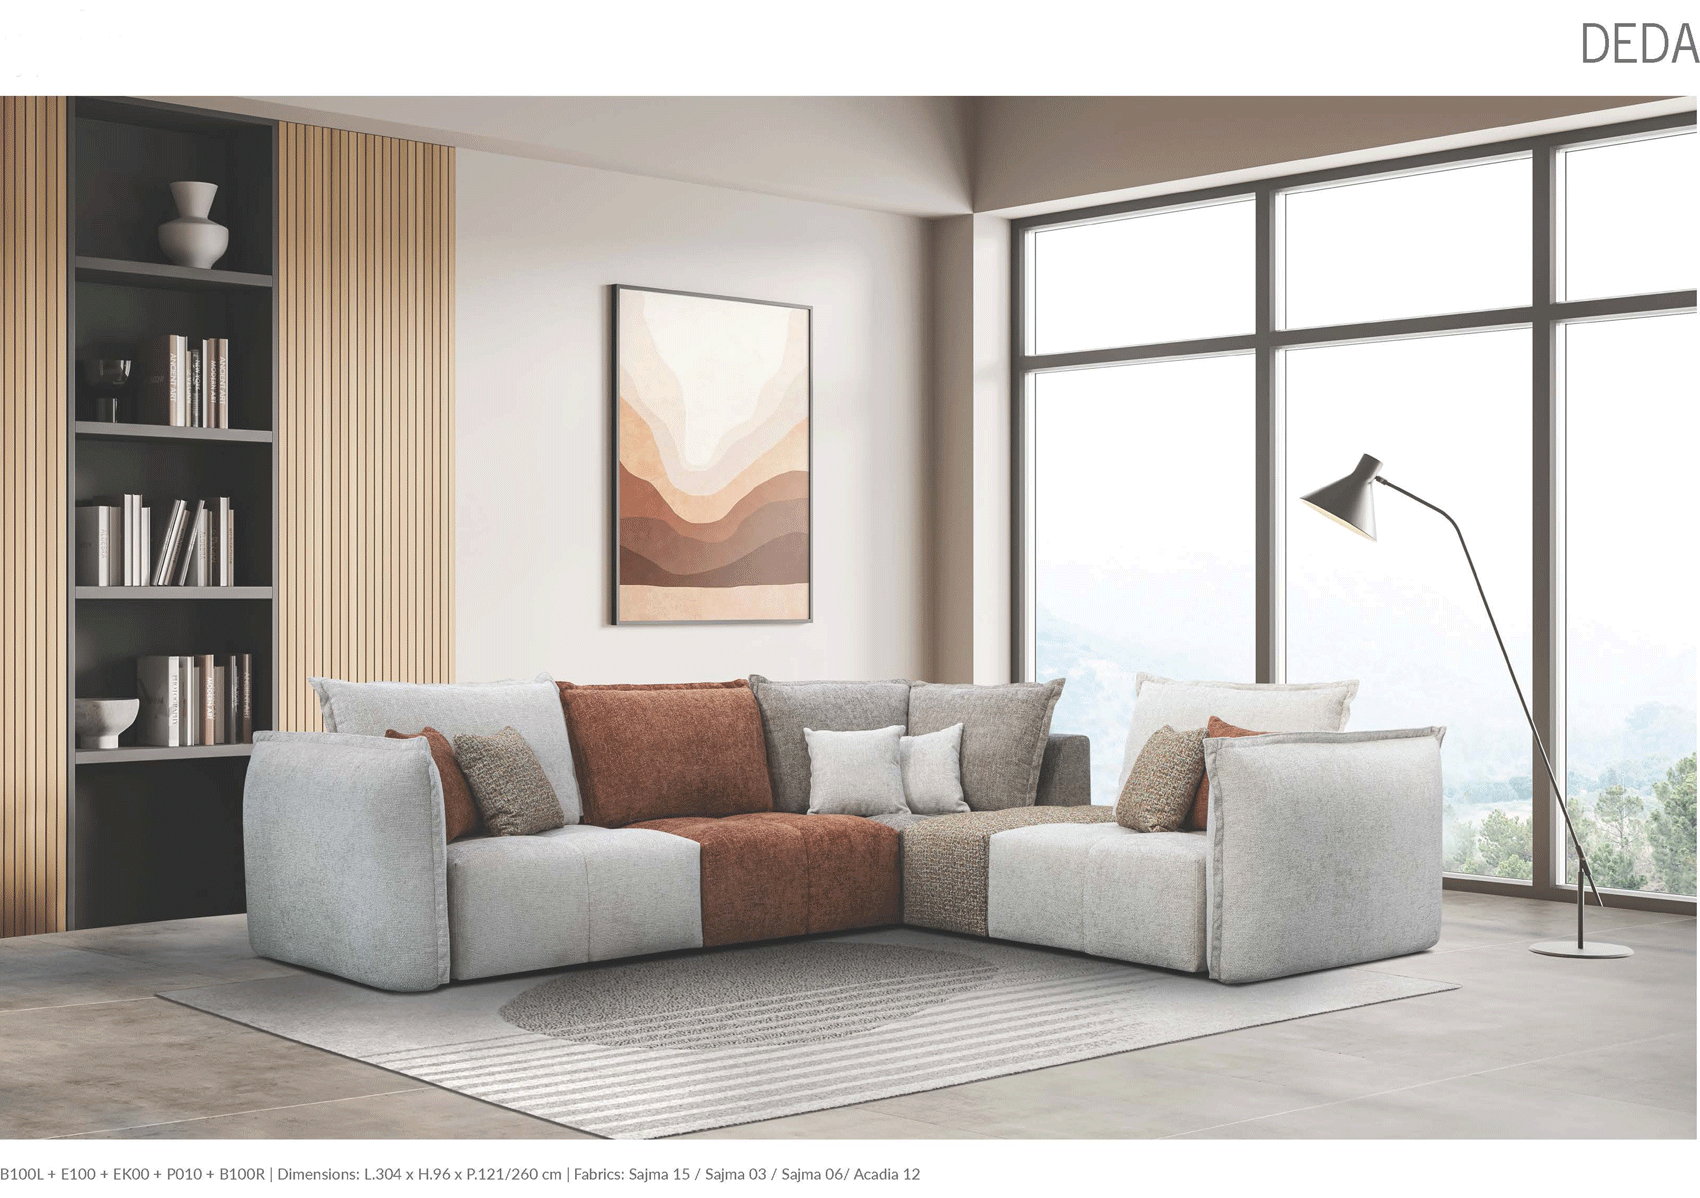 Living Room Furniture Sofas Loveseats and Chairs Deda Sectional